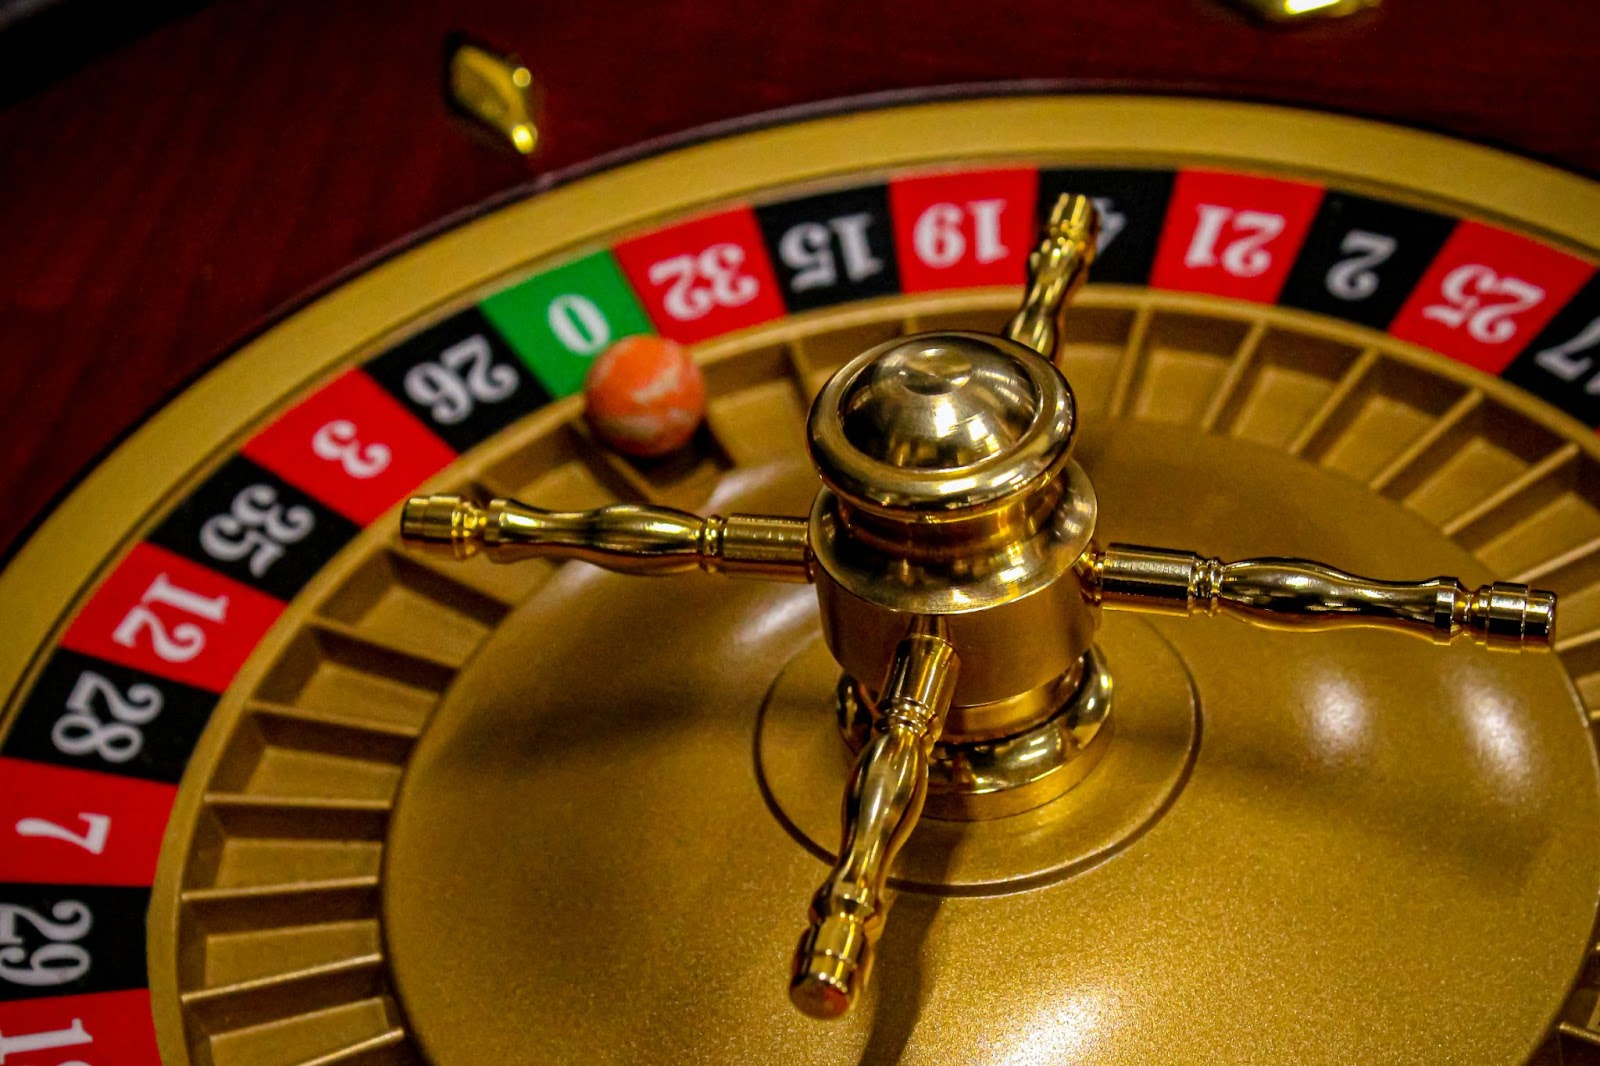 What rules should I follow when playing roulette?